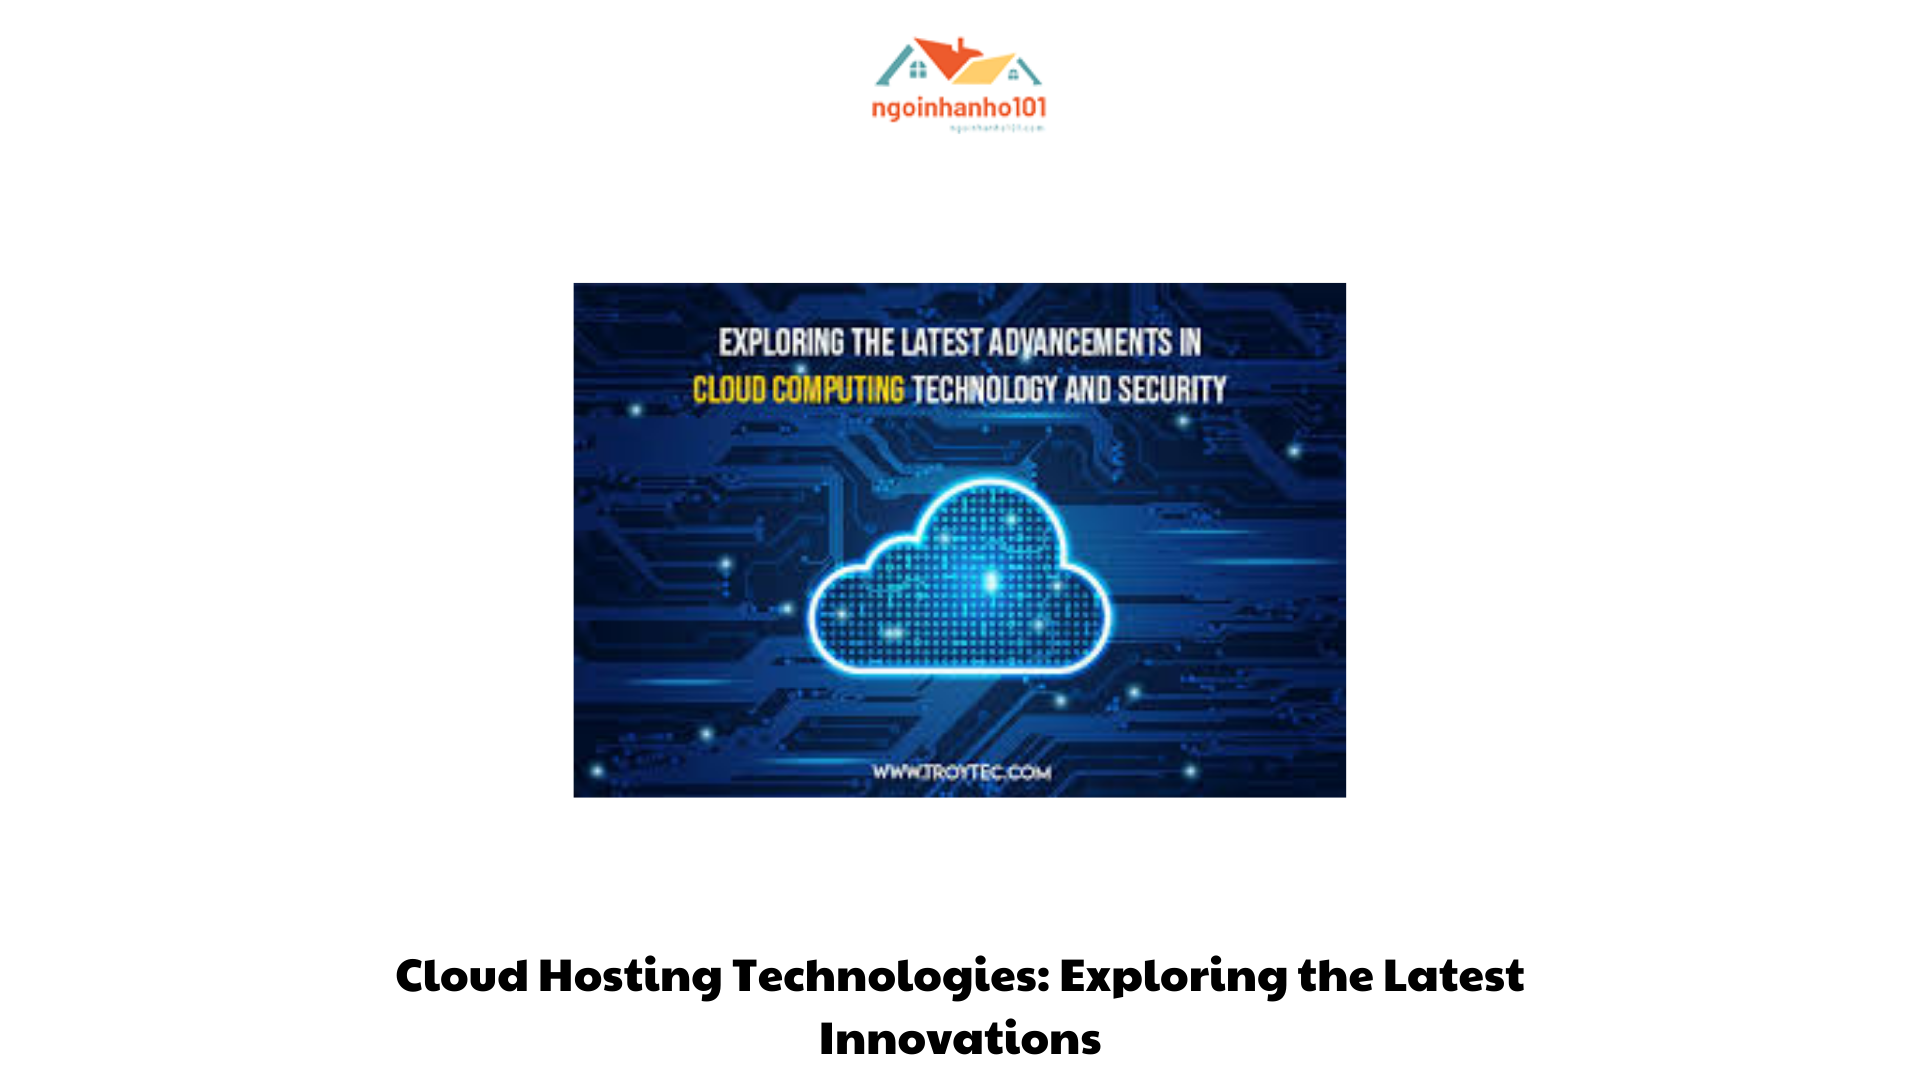 Cloud Hosting Technologies Exploring the Latest Innovations (3)